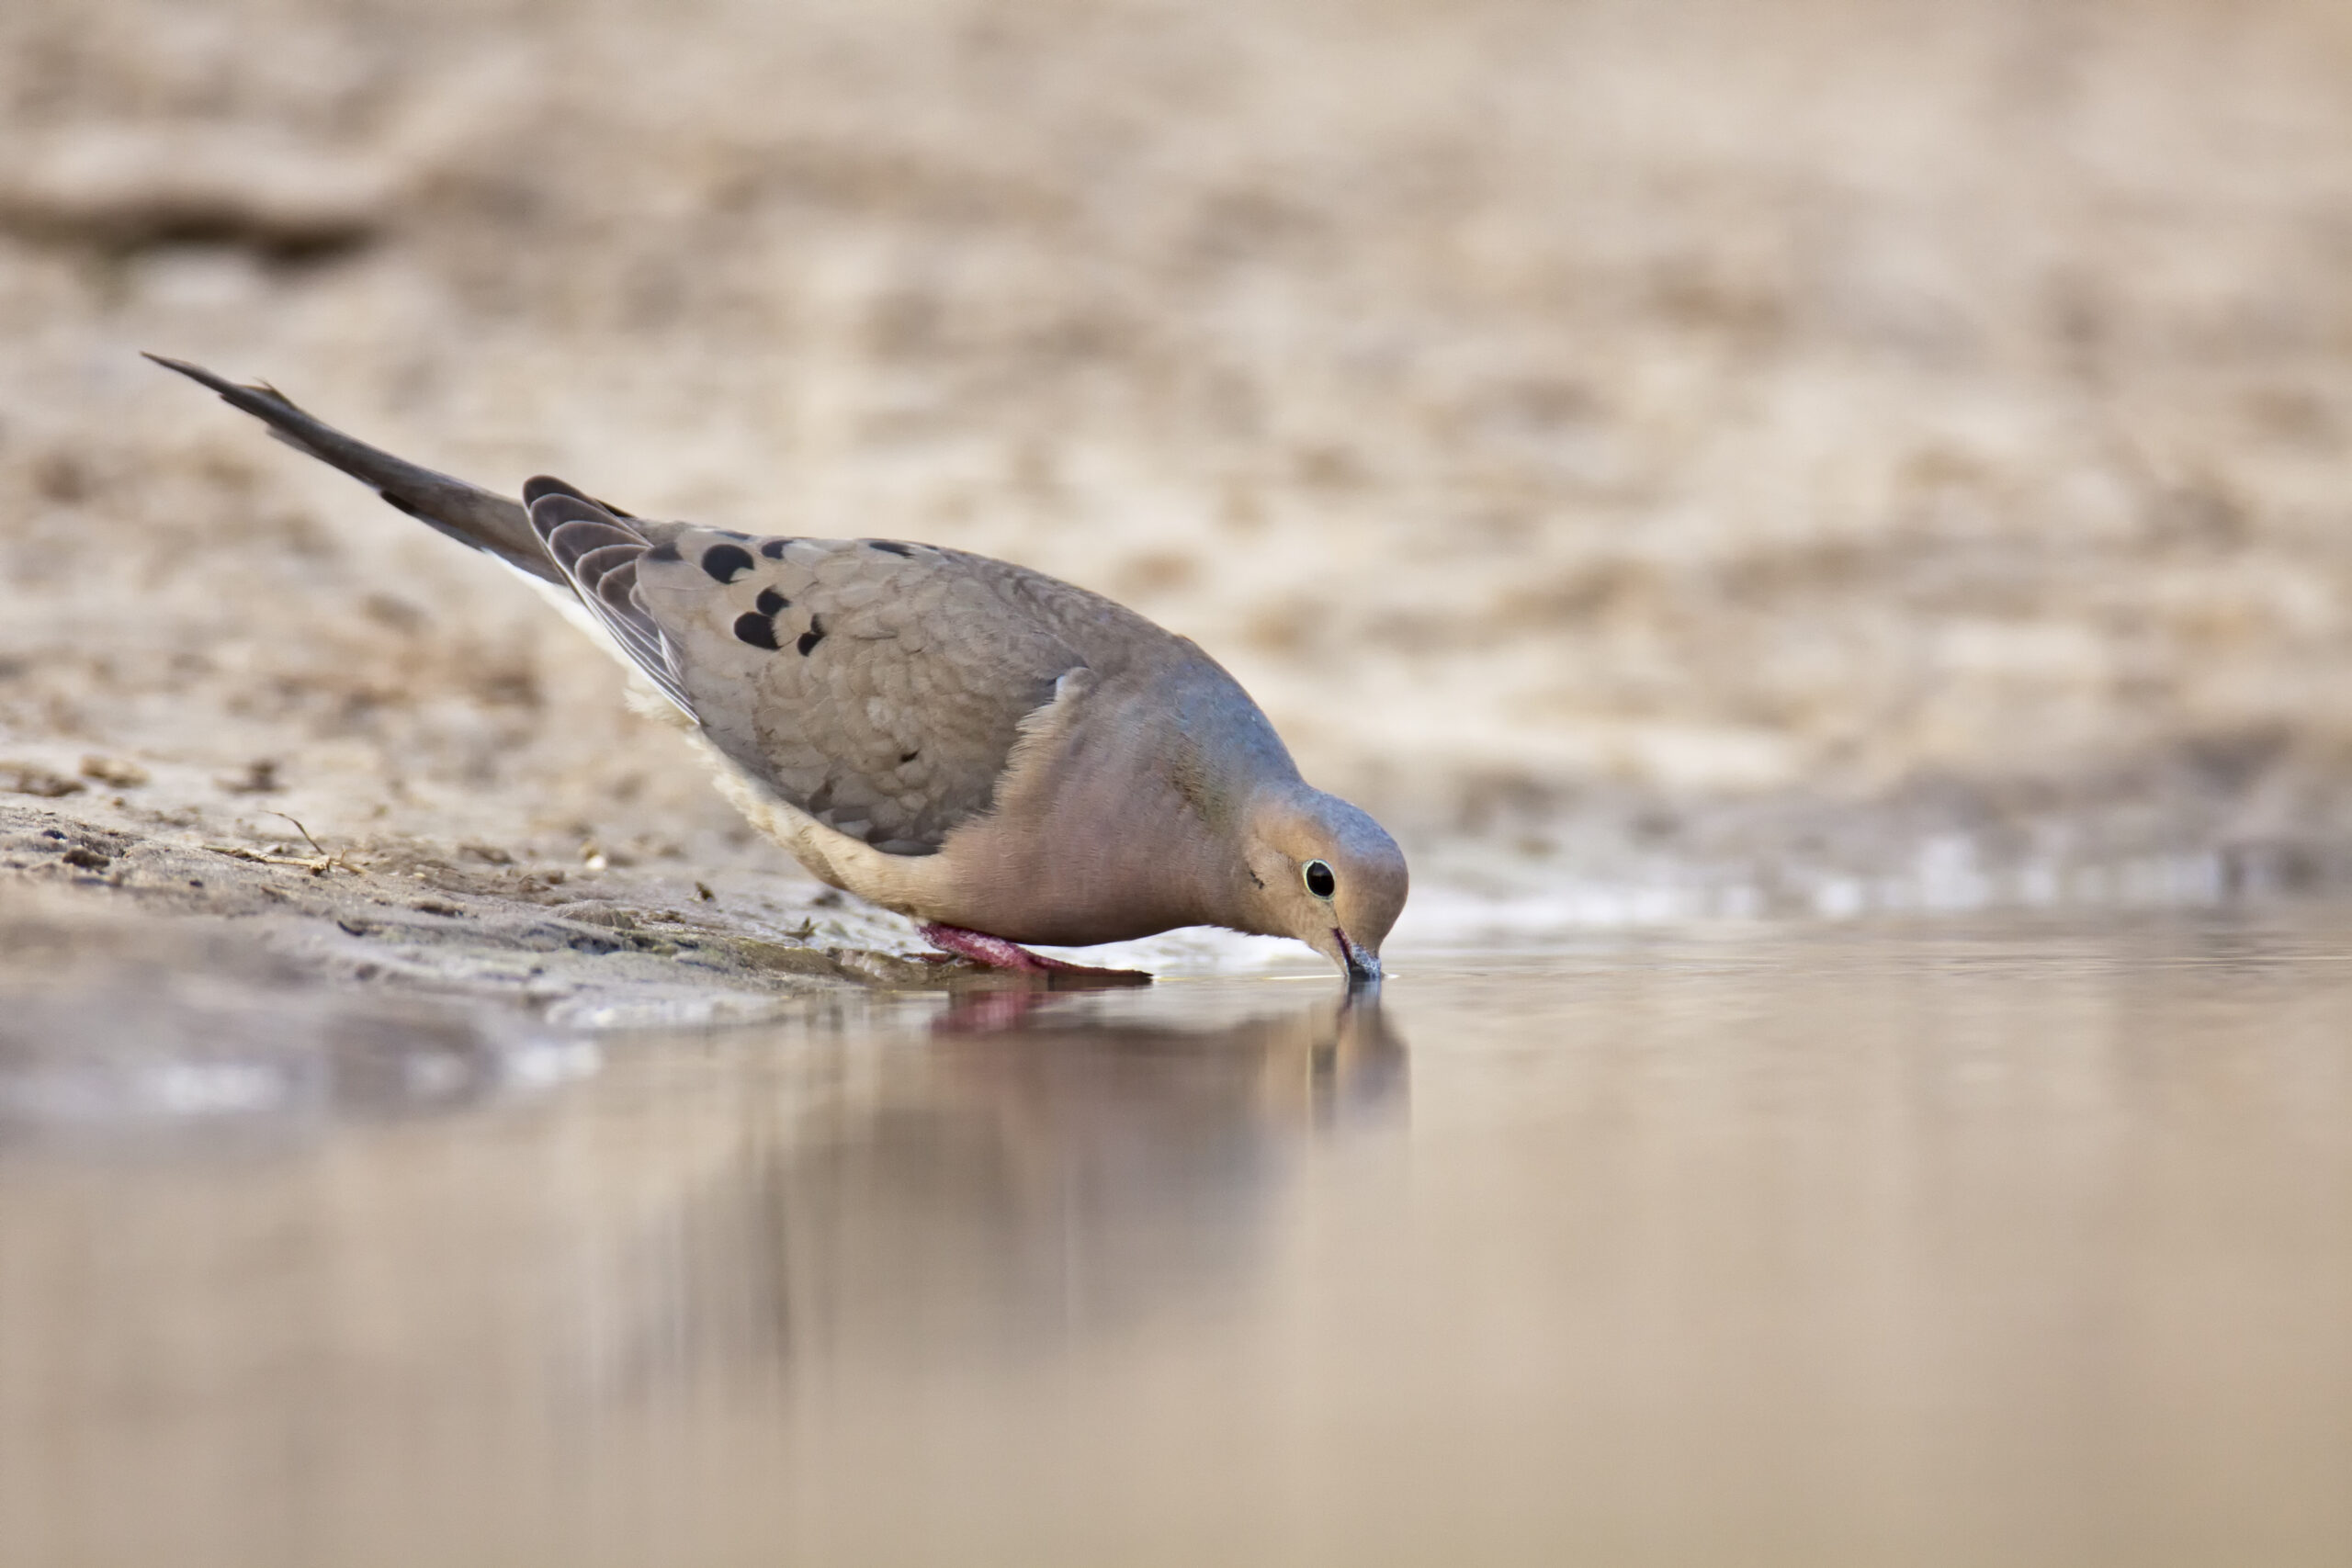 Doves need water to survive.